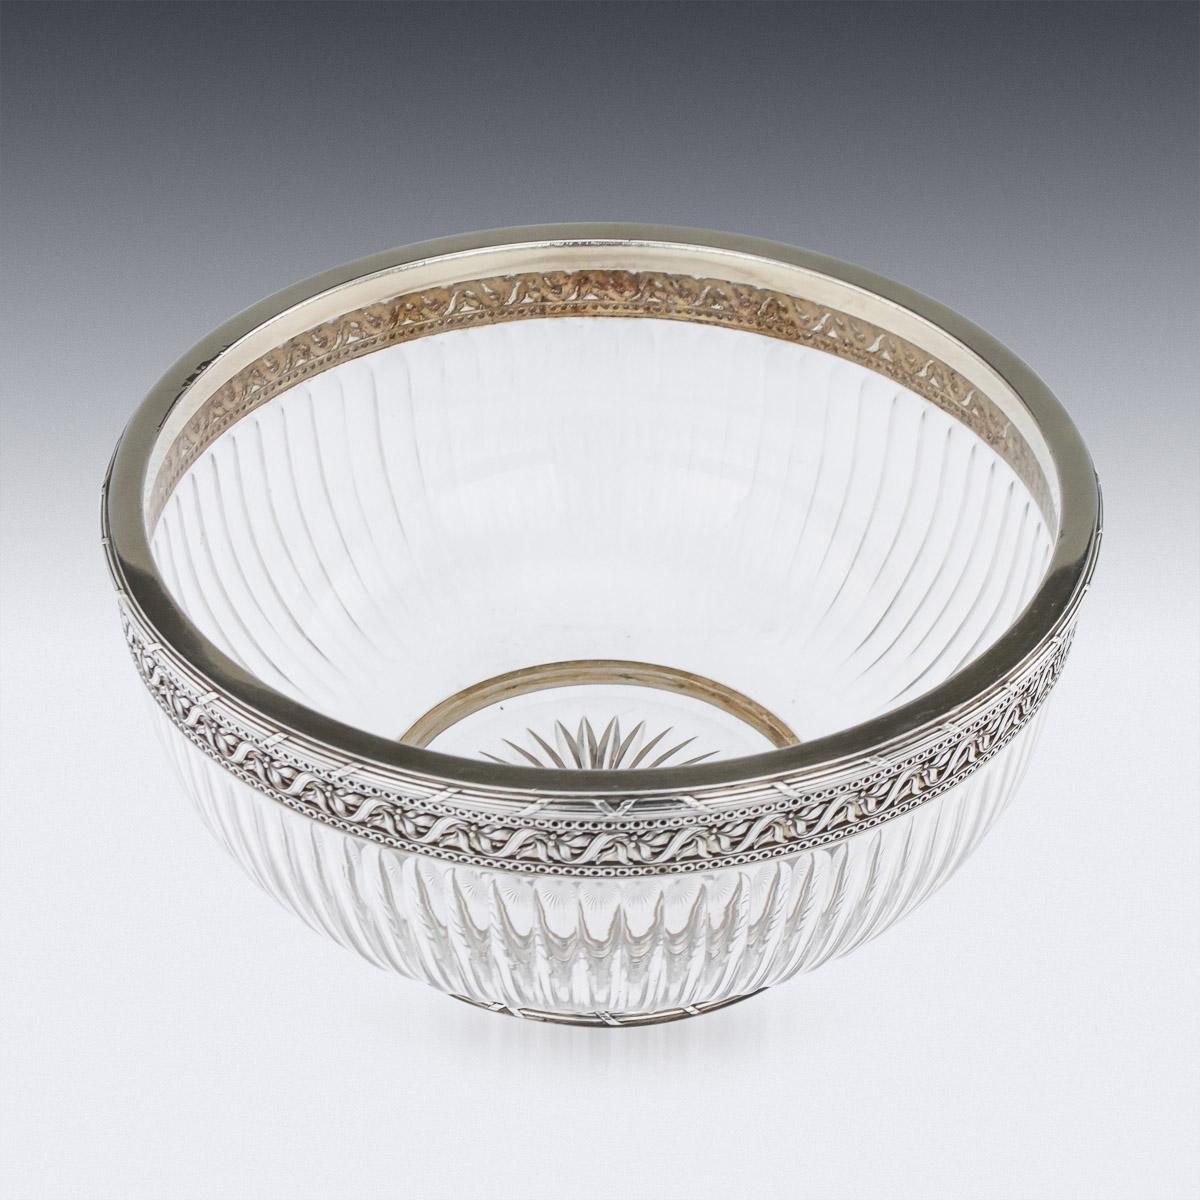 20th Century French Empire Solid Silver & Glass Bowl, Paris, c.1900 For Sale 1